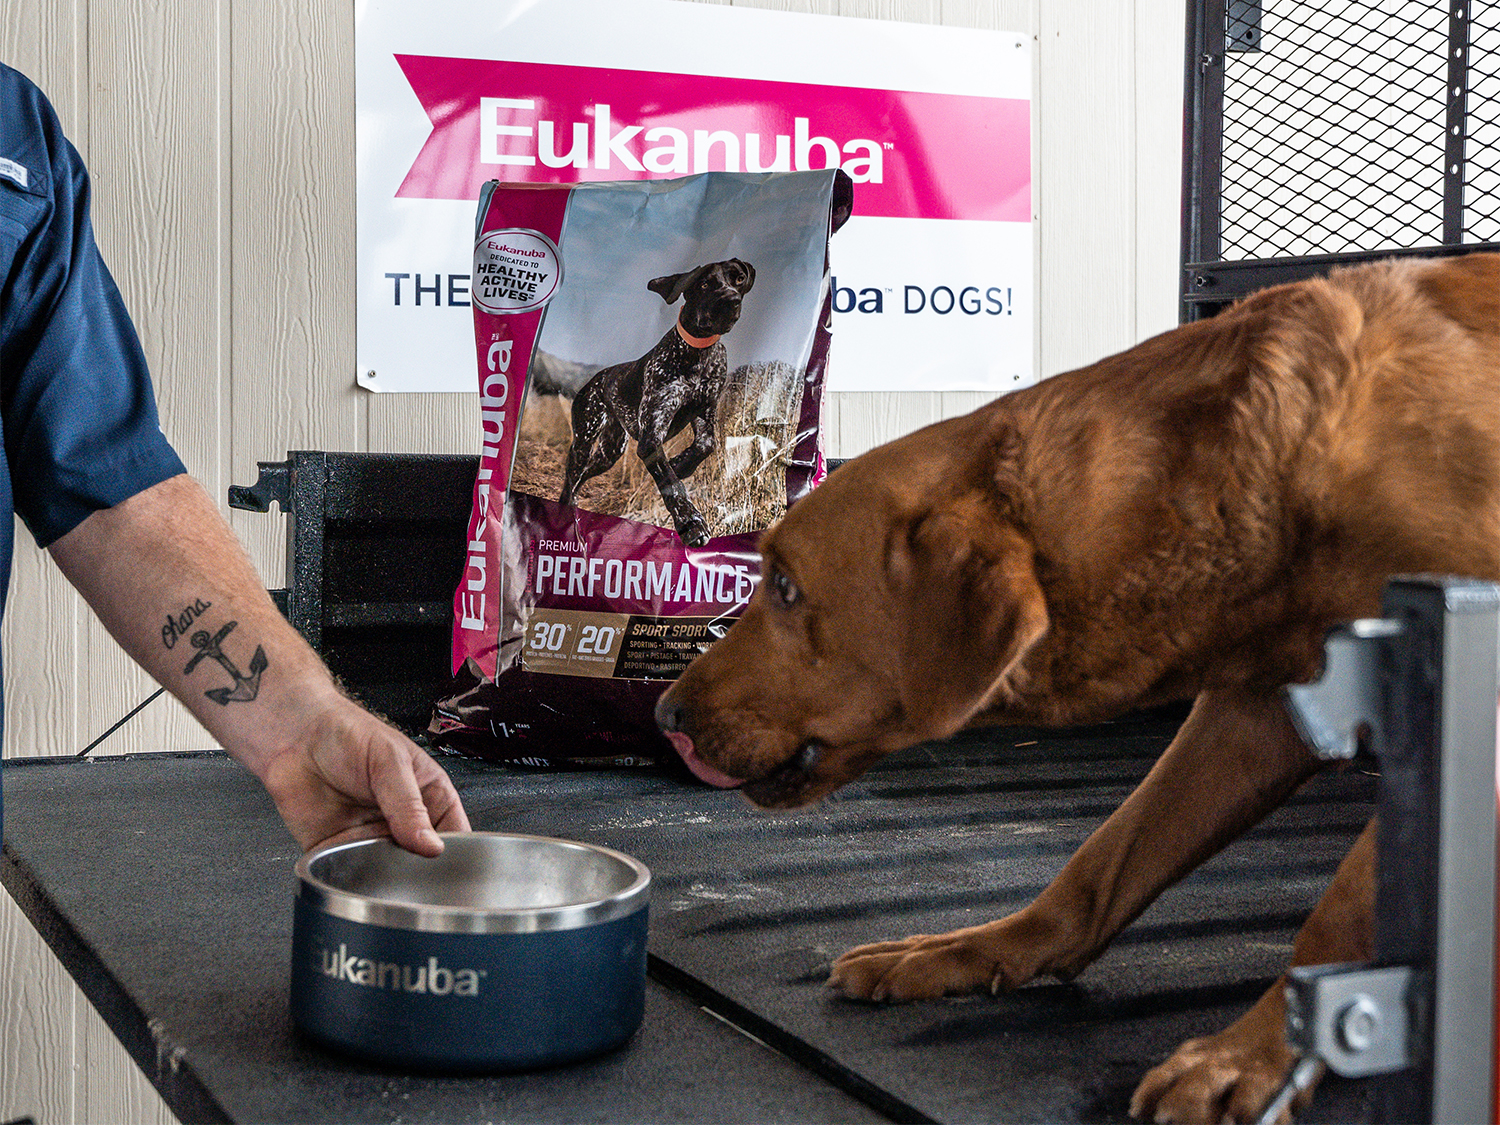 A hunting dog in the bed of a UTV eats from a bowl next to a bag of Eukanuba dog food.